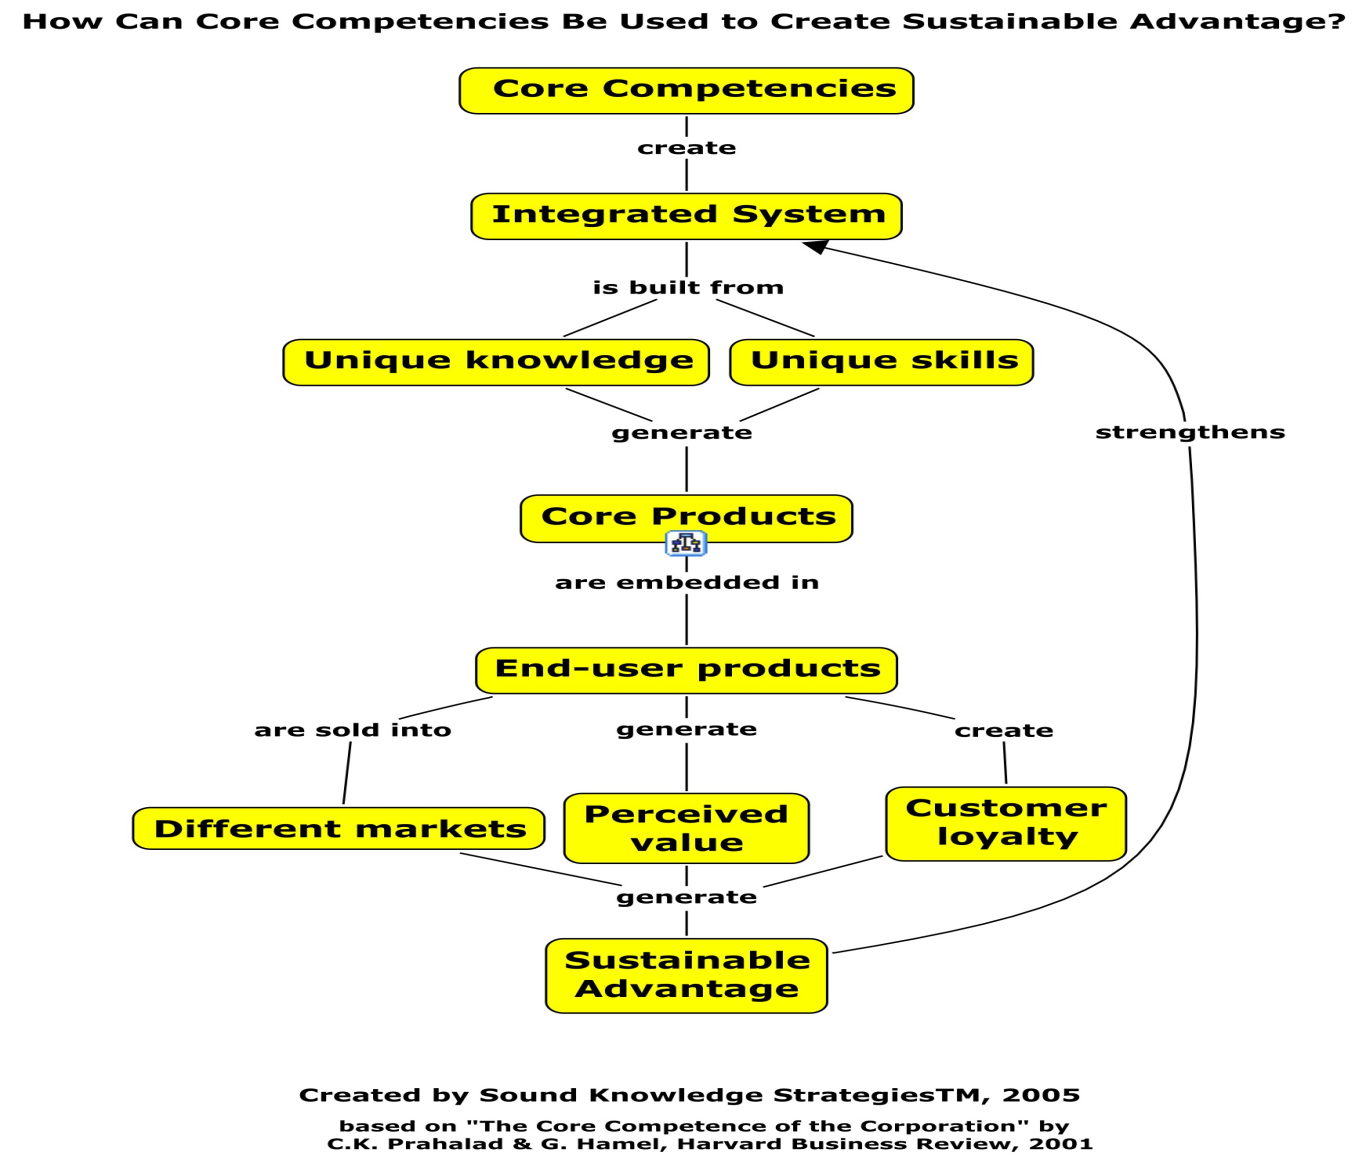 How can Core Competencies Be Used to Create Sustainable Advantage.